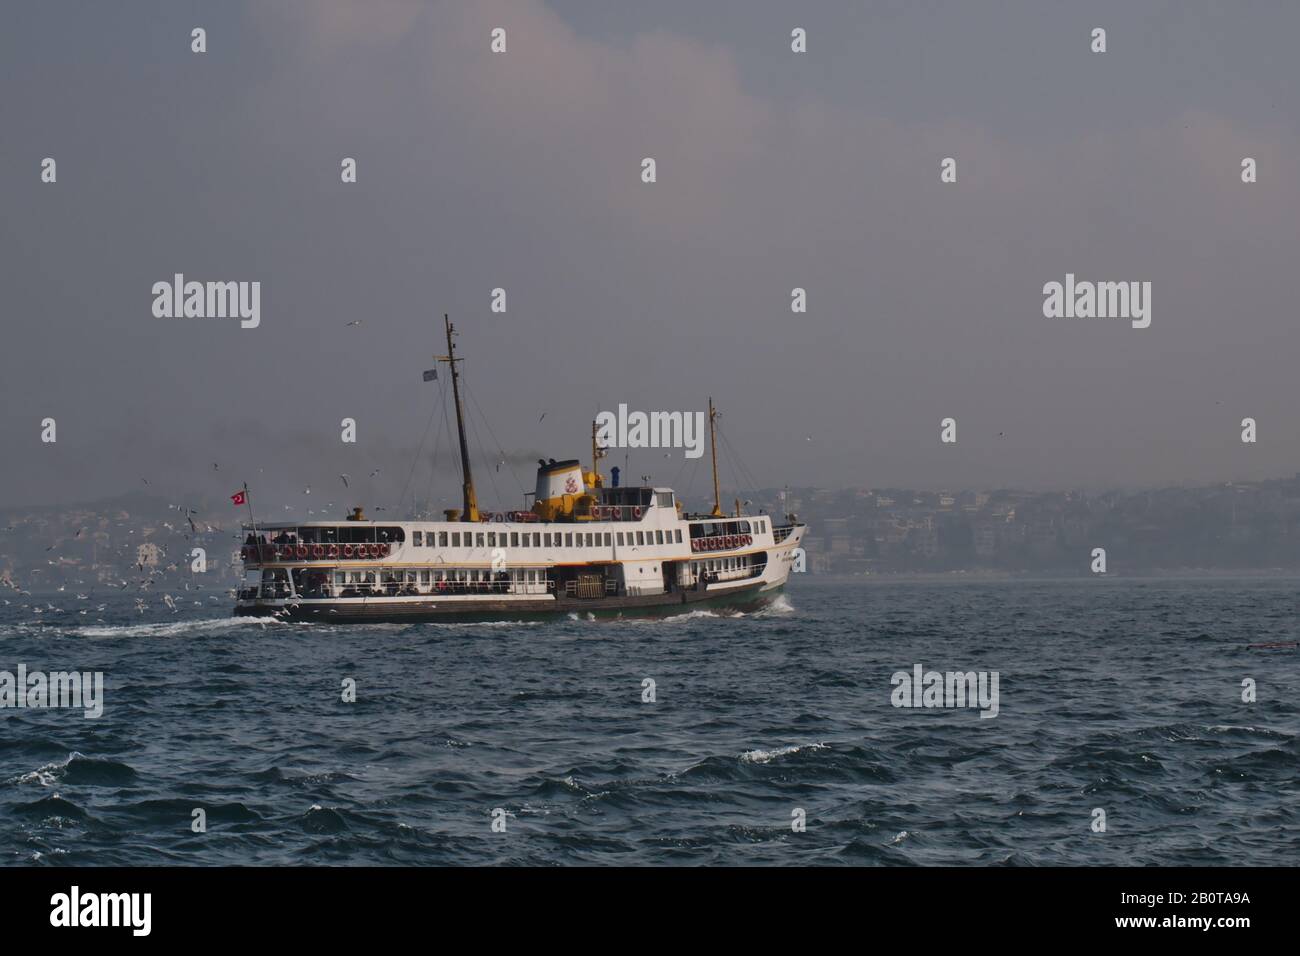 Inner City Cruise Ship Sails on a Hazy Istanbul Day Stock Photo